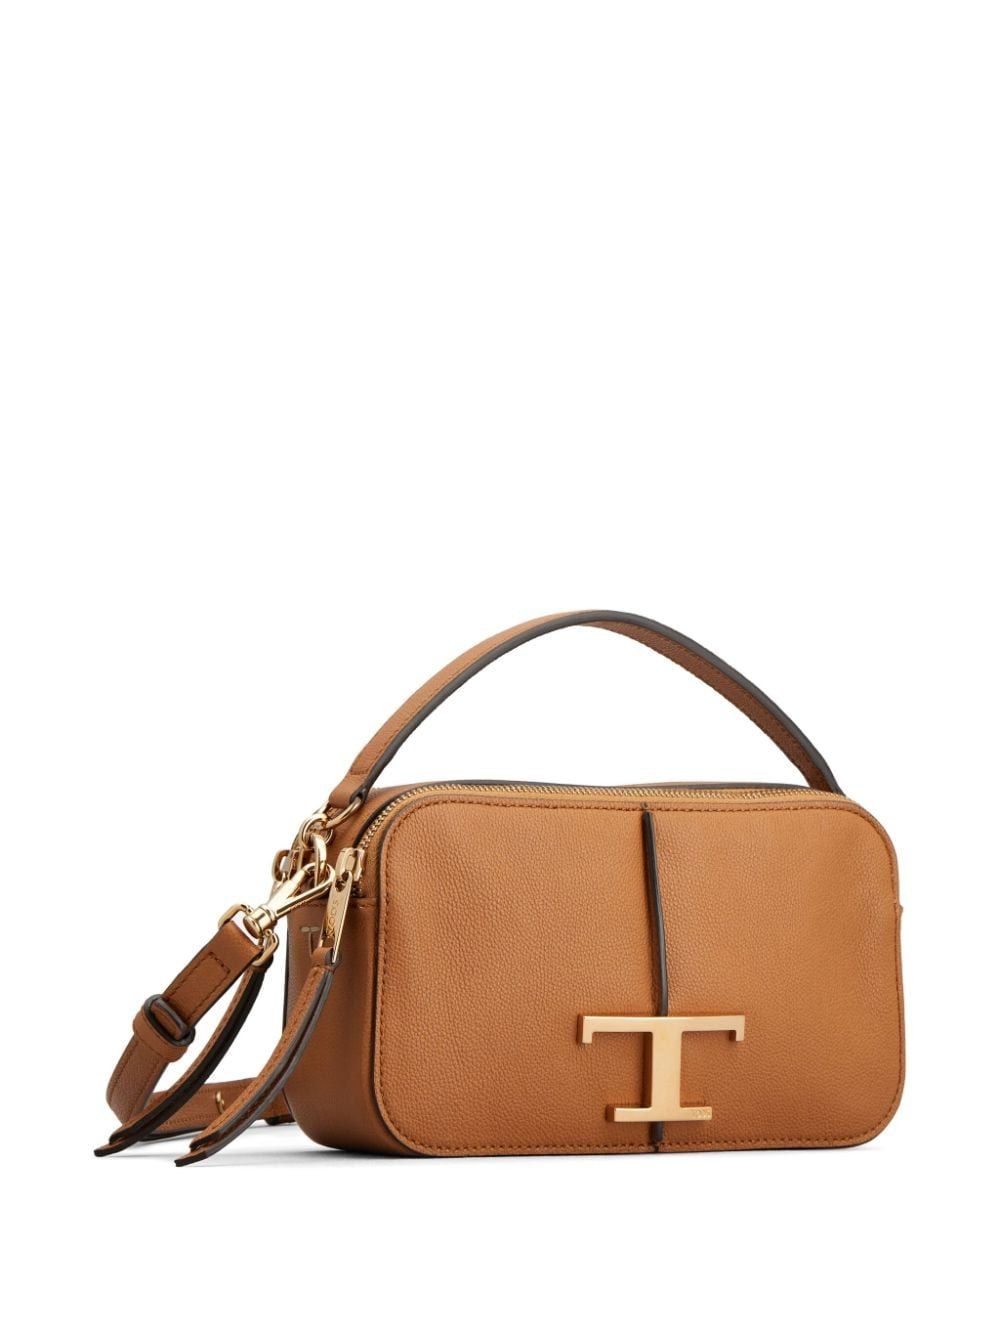 TOD'S Mini Timeless Brown Leather Crossbody Bag for Women